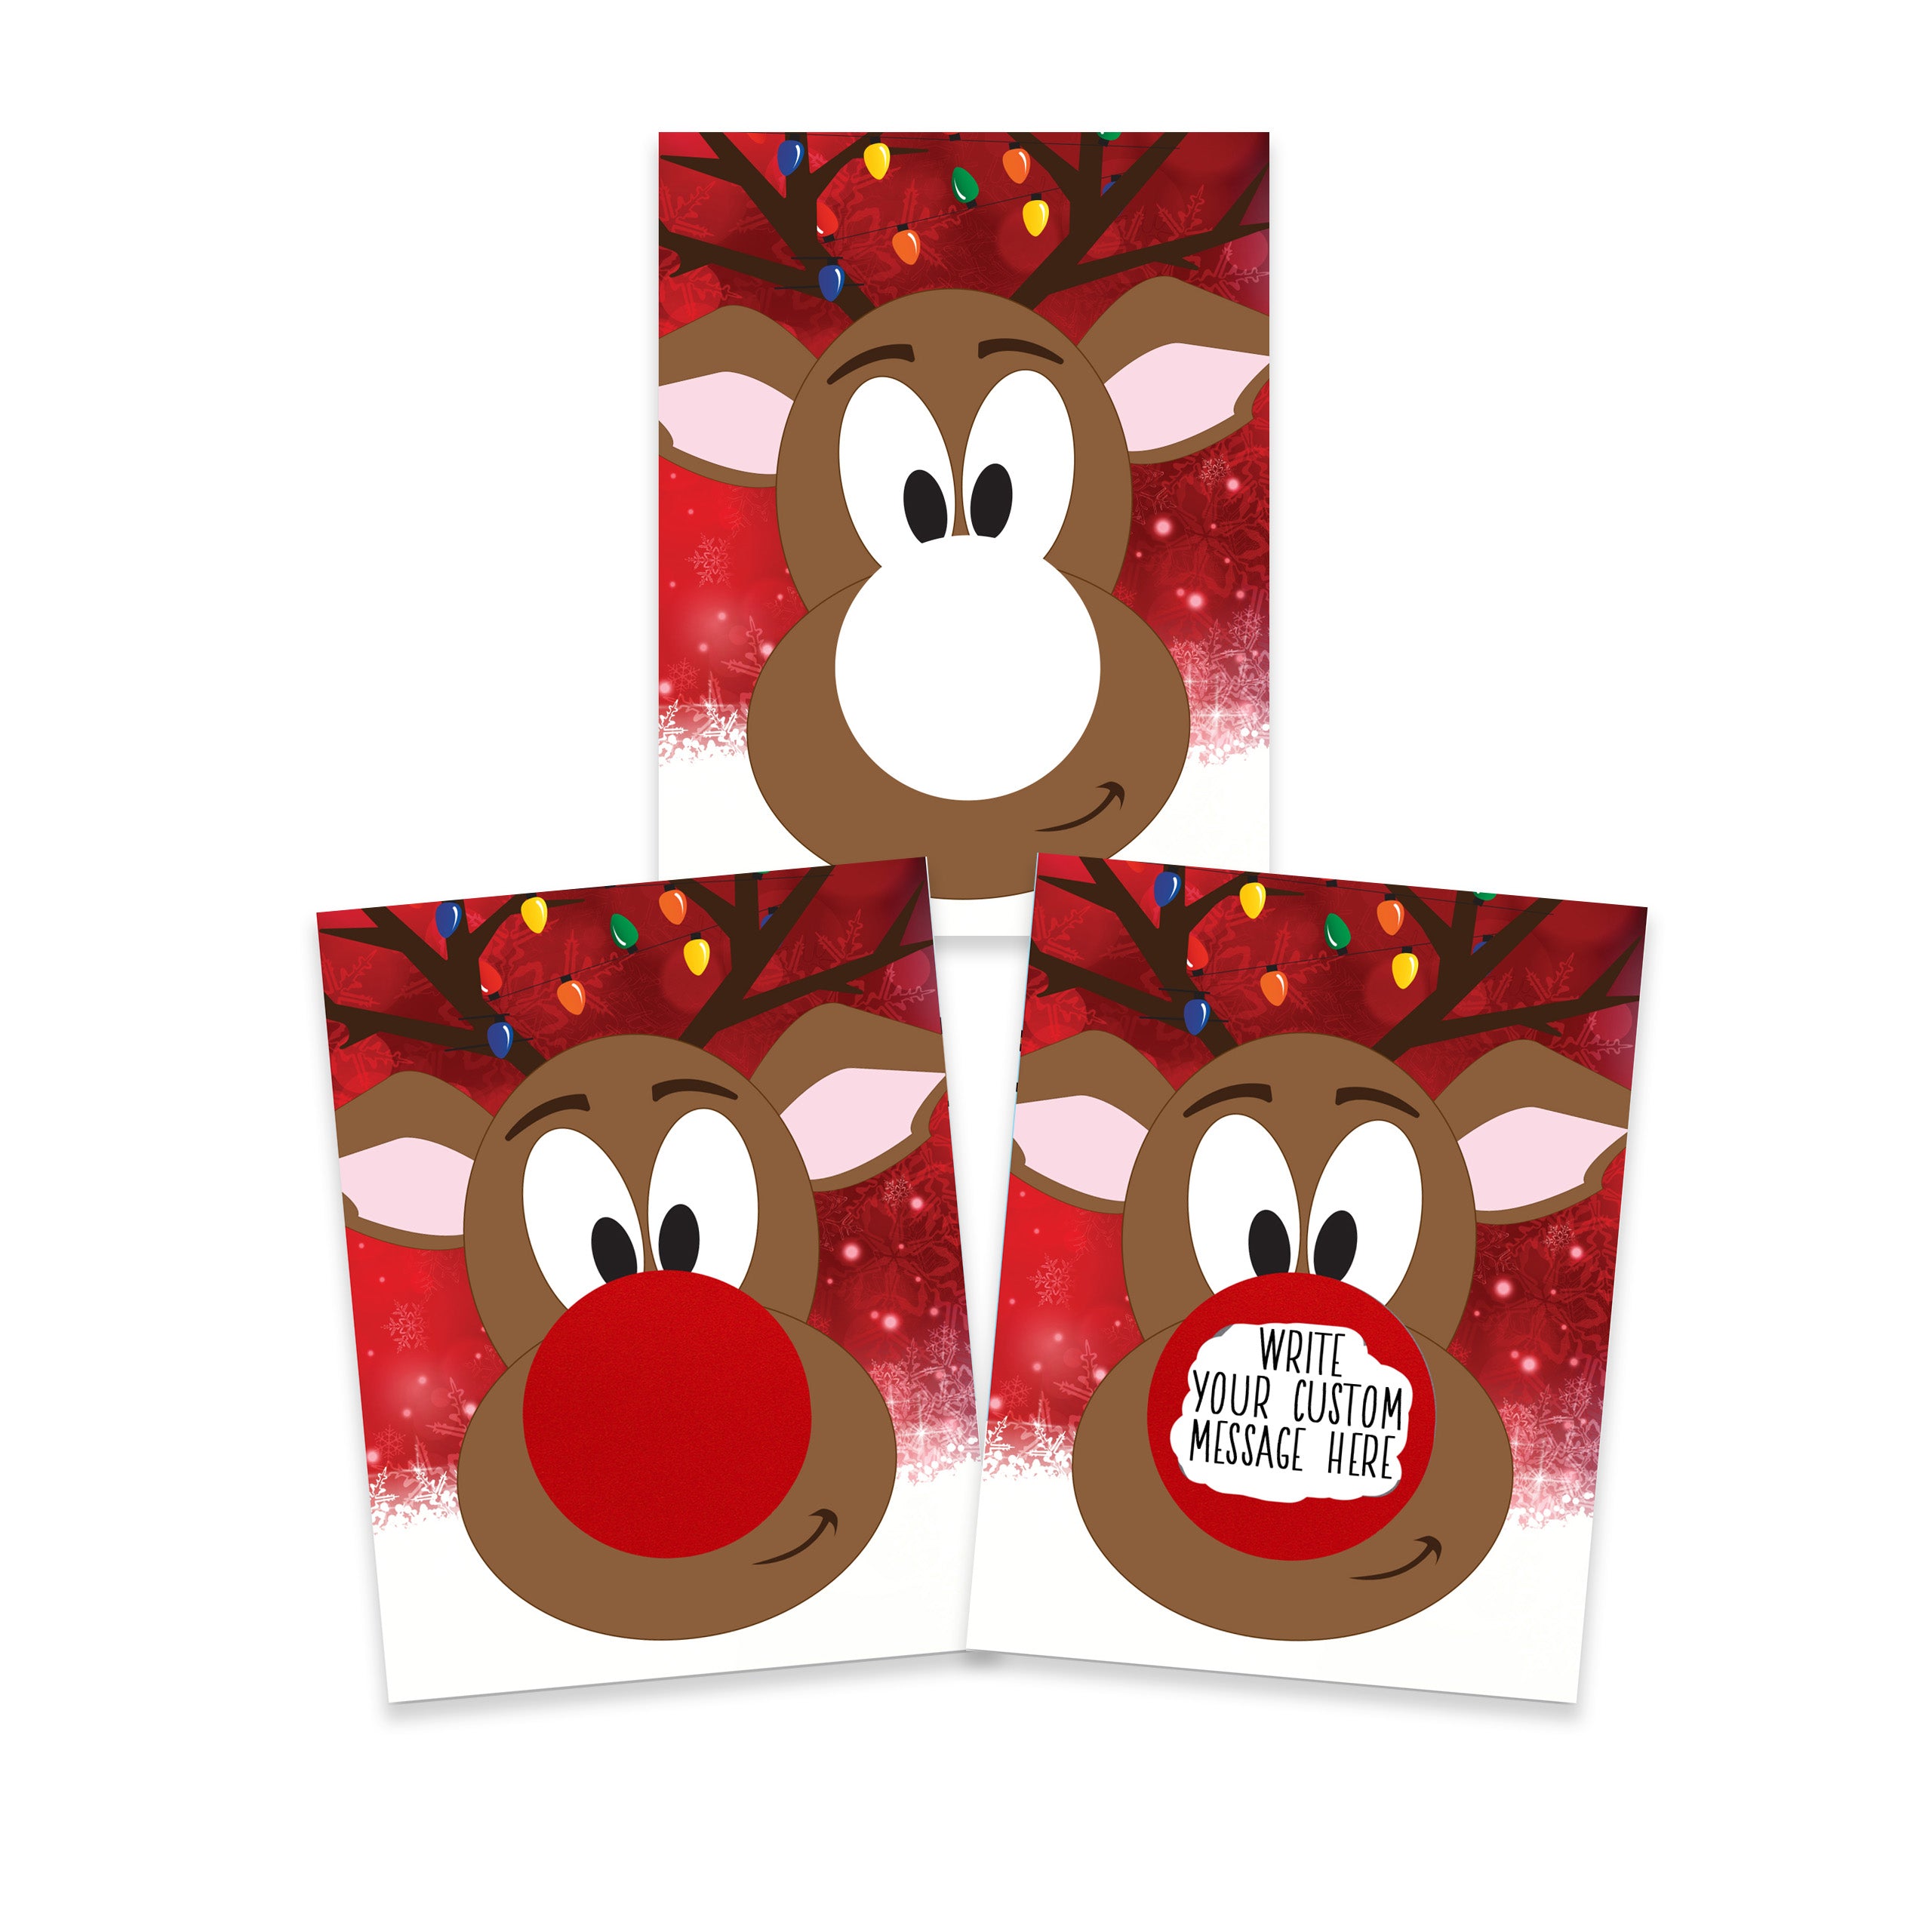 DIY Christmas Rudolph the Reindeer Make Your Own Scratch Offs - 20 Cards and 20 Scratch Off Stickers